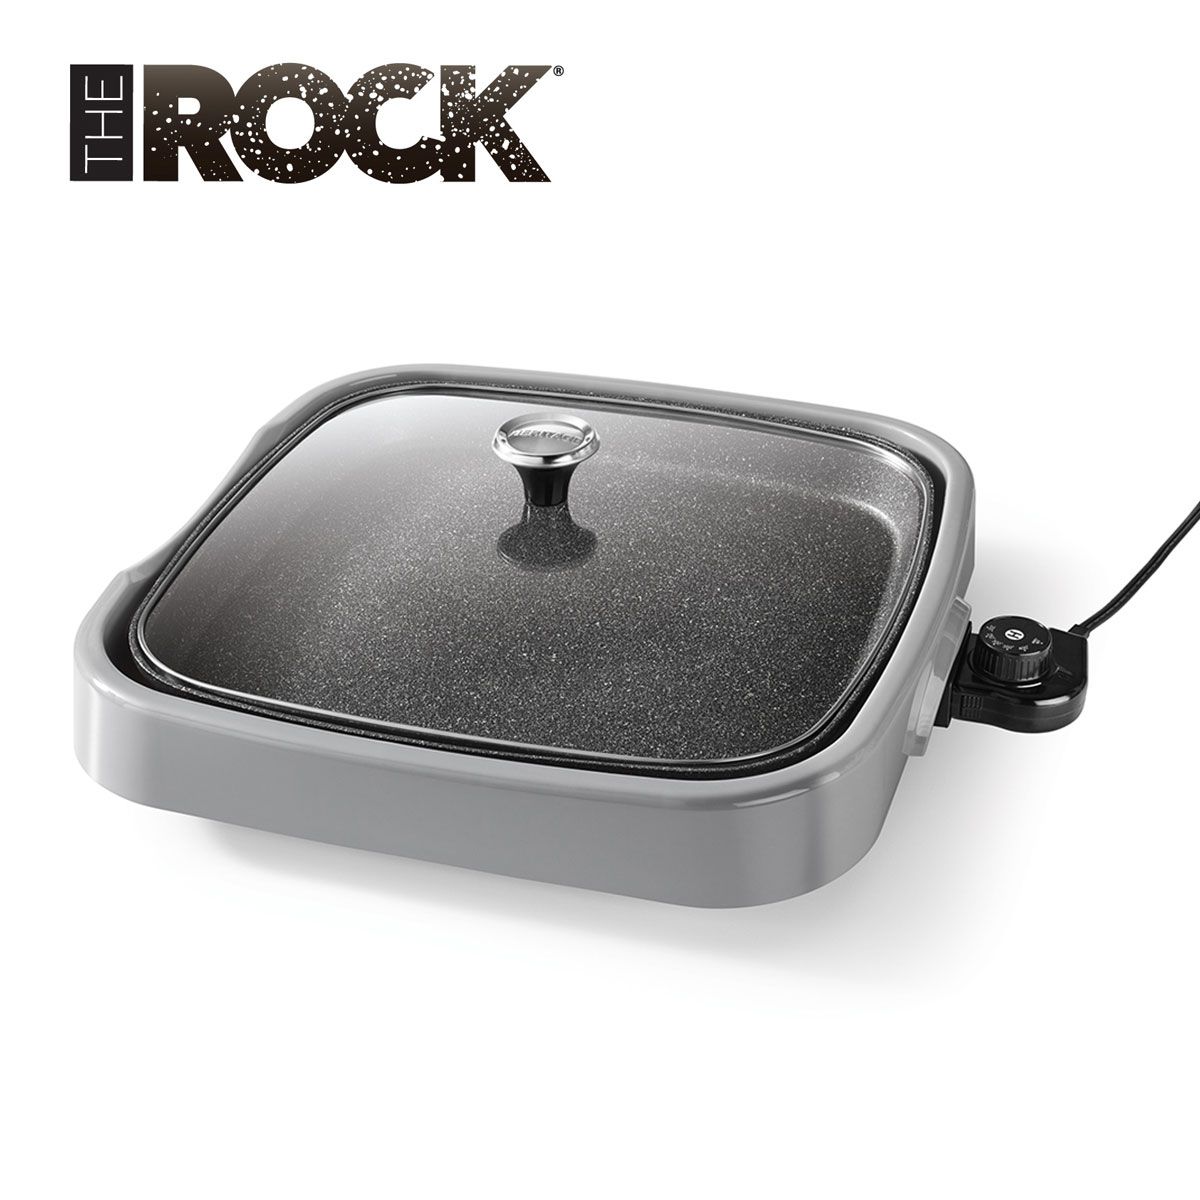 Starfrit The Rock 14 Electric Non-Stick Griddle